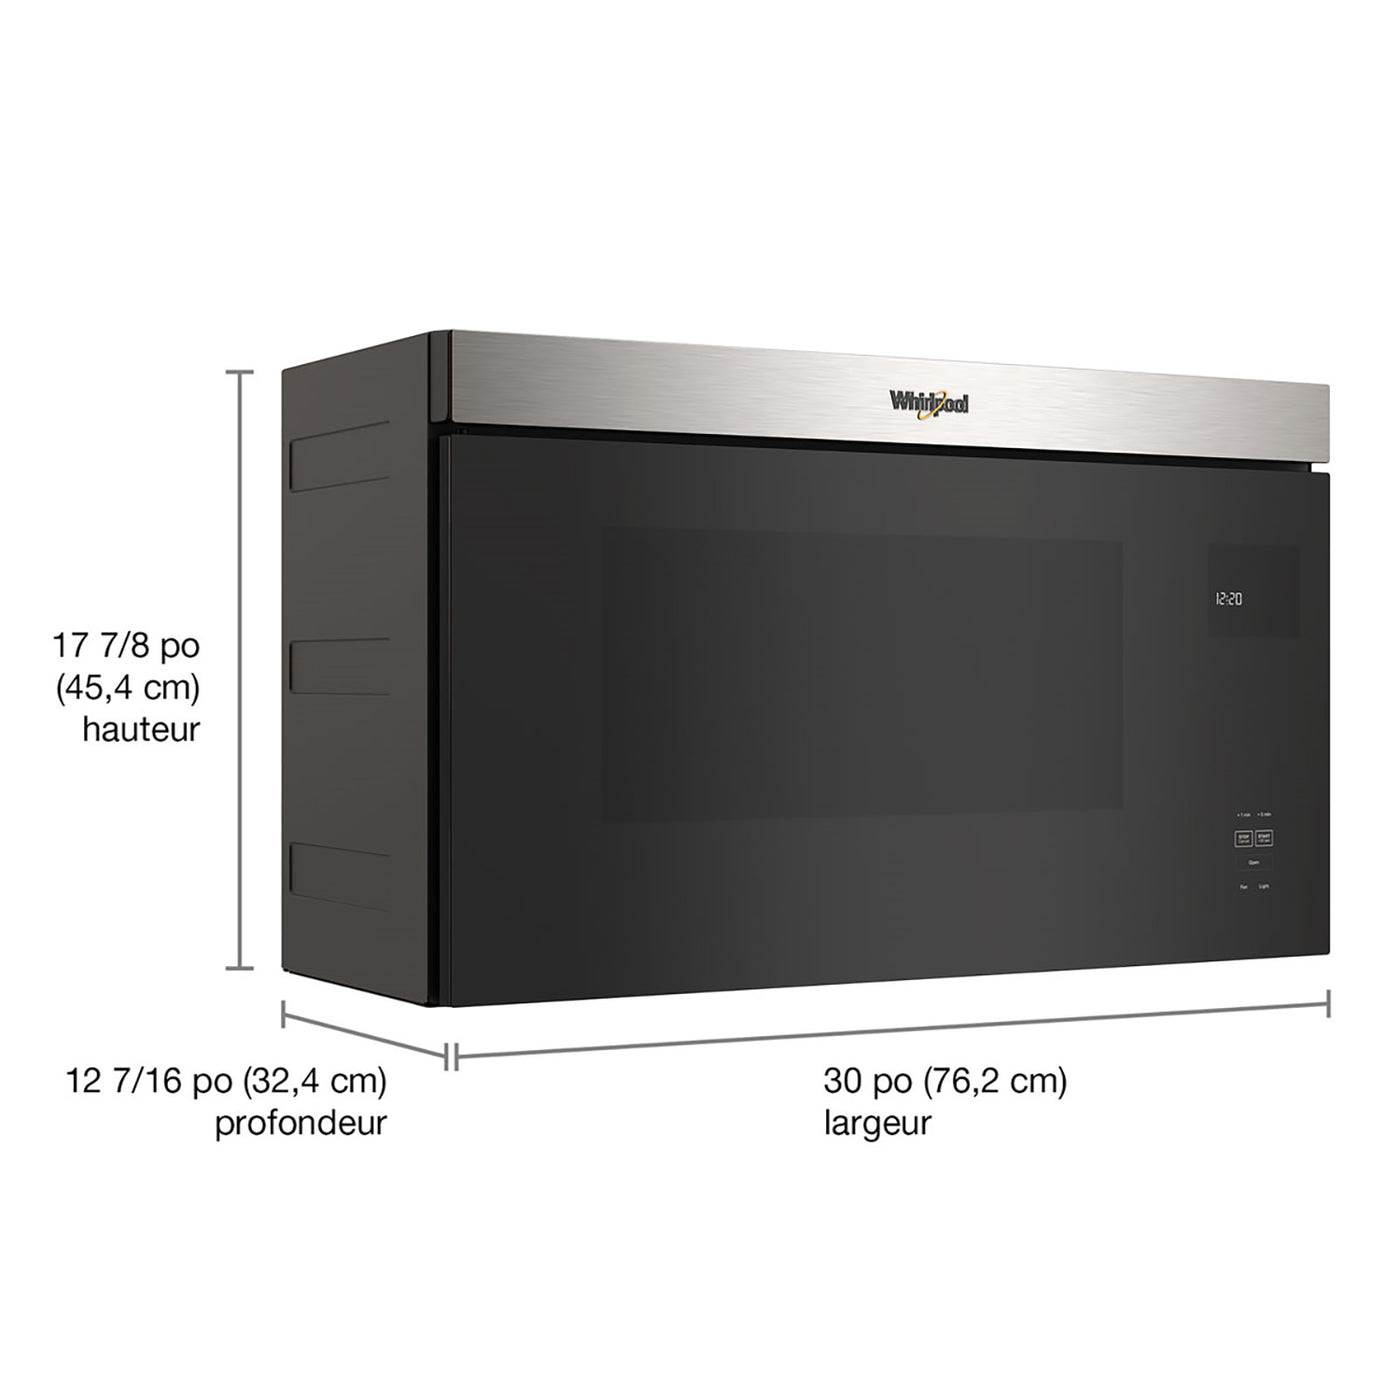 Whirlpool Fingerprint Resistant Stainless Steel Over-the-Range Microwave (1.10 Cu Ft) - YWMMF5930PZ